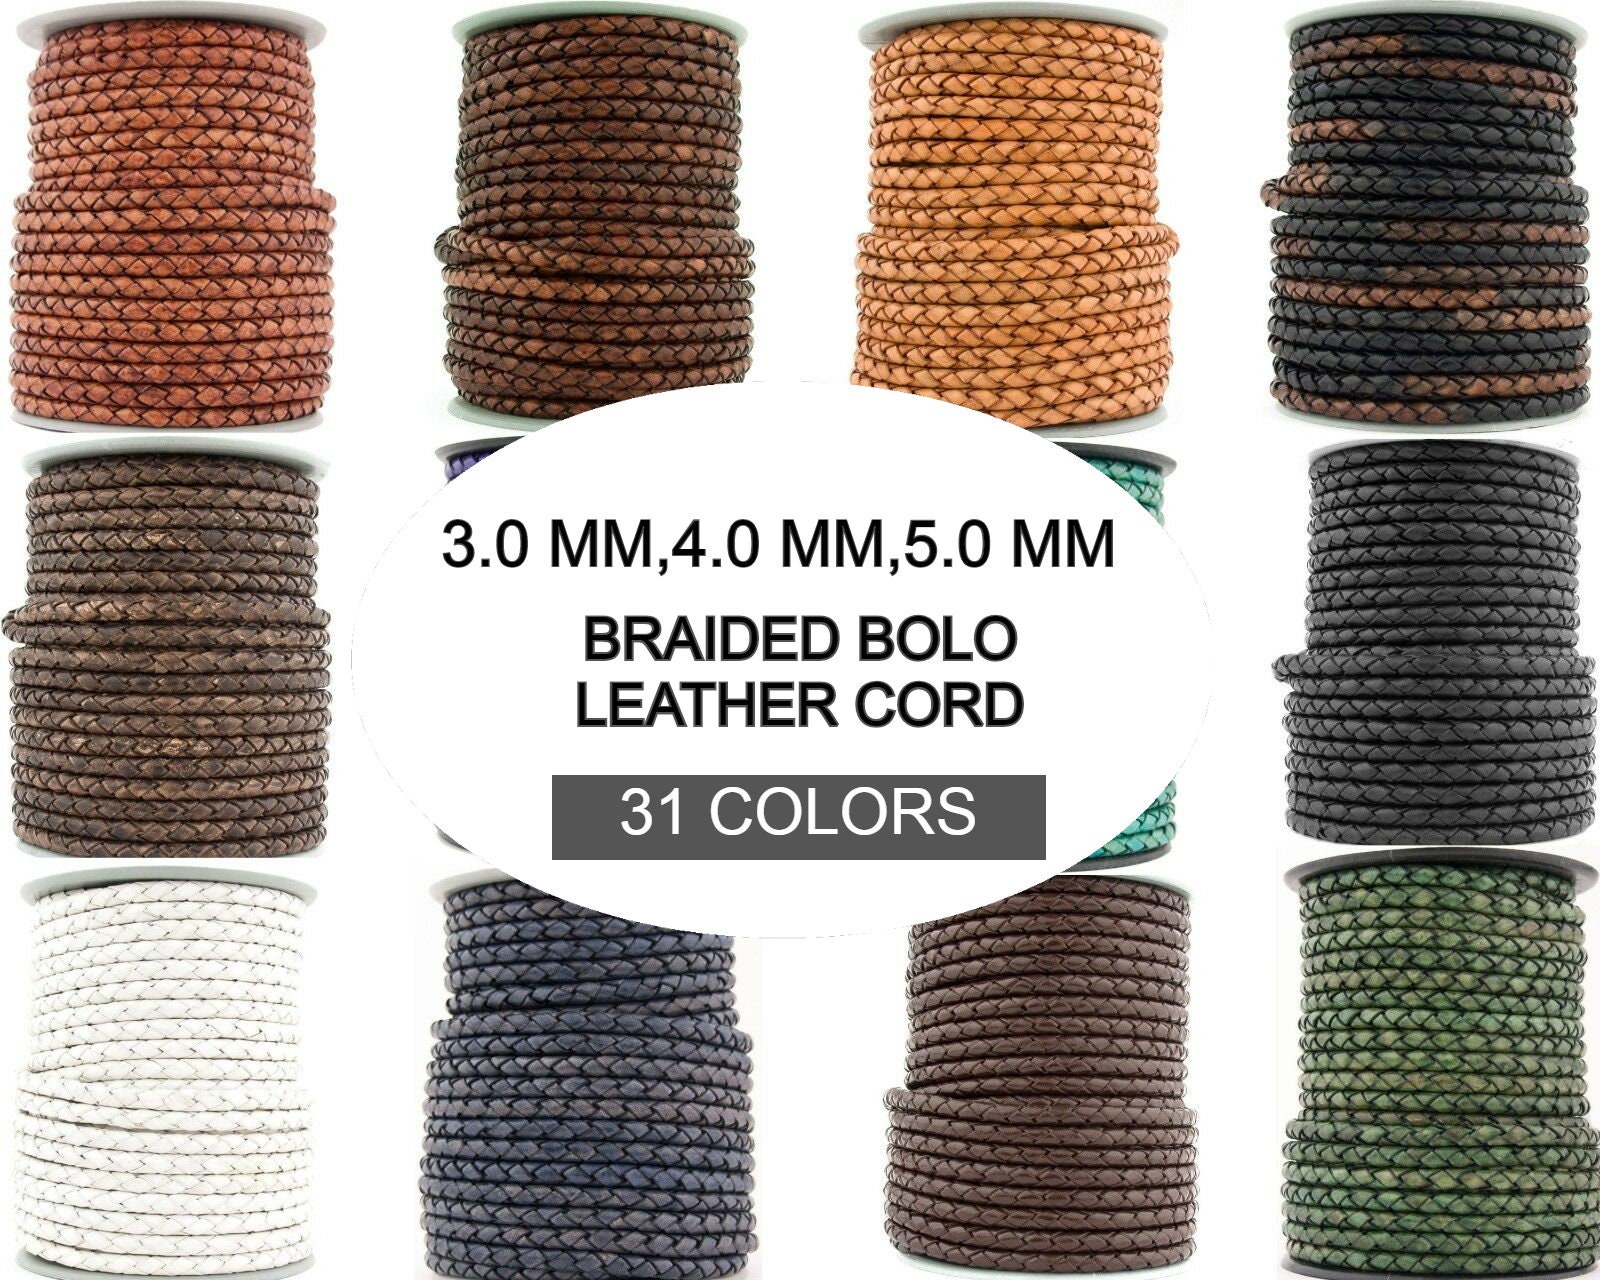 2.5mm Leather Cord,genuine Leather String Cord,real Leather Cord,black  Leather Cord,black Cord,1yard,5yard,10yard,50yardround Leather Cord 